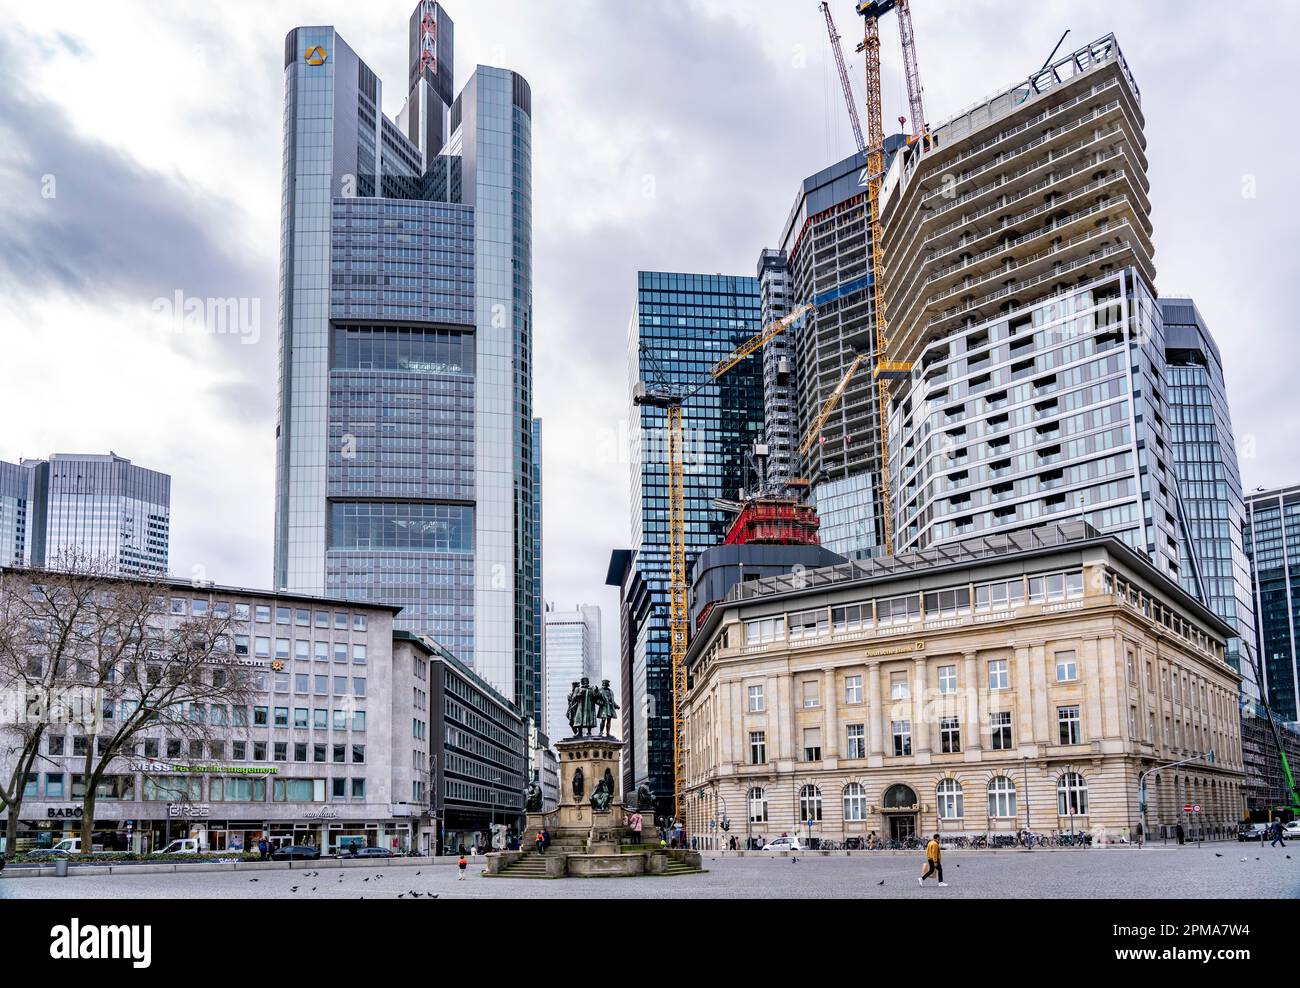 Construction site of the building project FOUR, 4 high-rise towers at Roßmarkt in Frankfurt am Main, will be up to 228 metres high, with 59 storeys, u Stock Photo